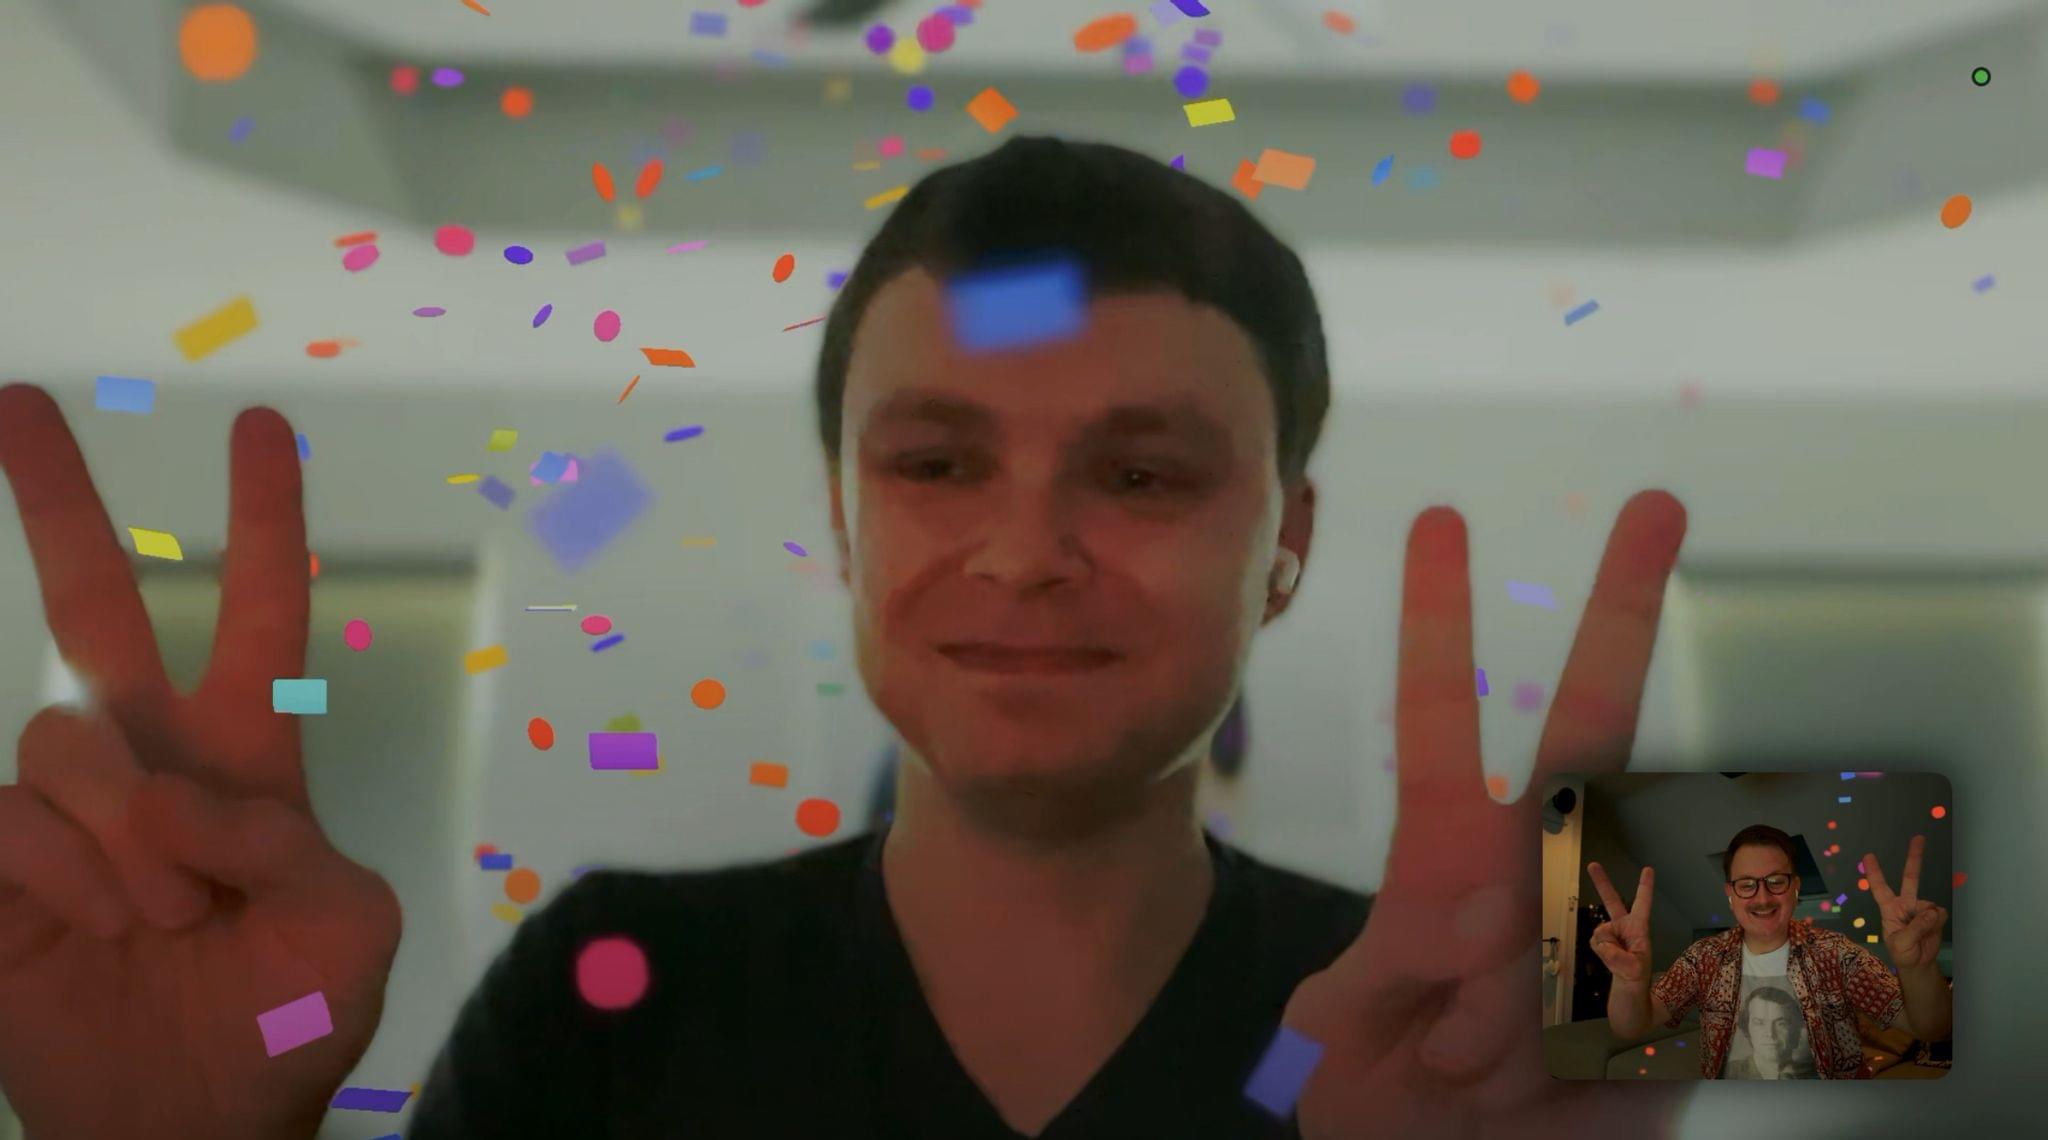 The confetti reaction is still my favorite, whether in iMessage or now FaceTime.